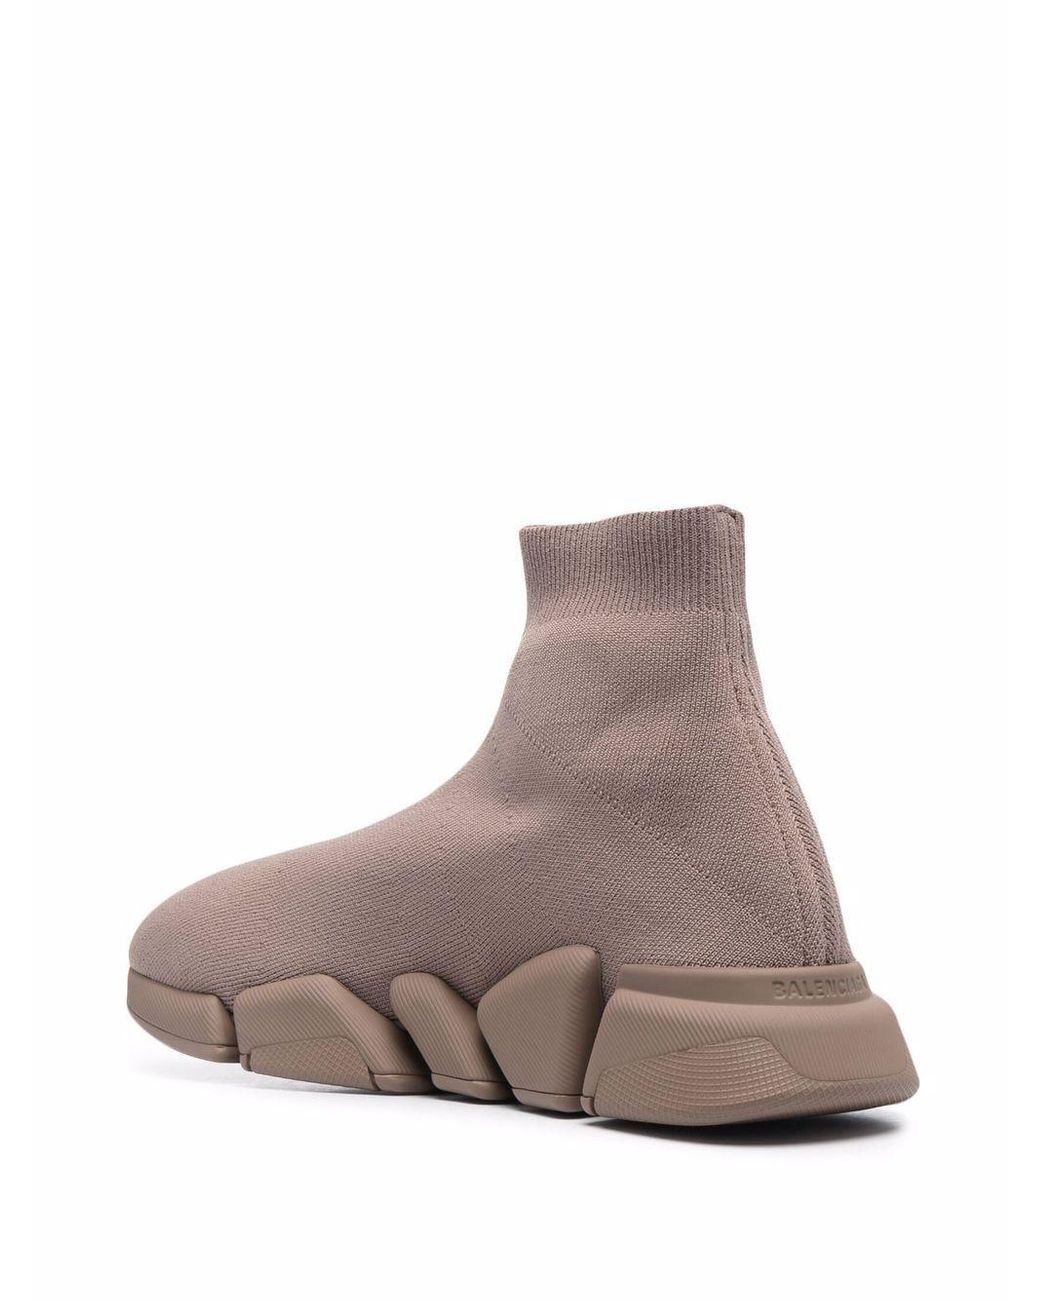 Balenciaga Rubber Speed 2.0 Pull-on Sneakers in Beige (Natural) for Men |  Lyst